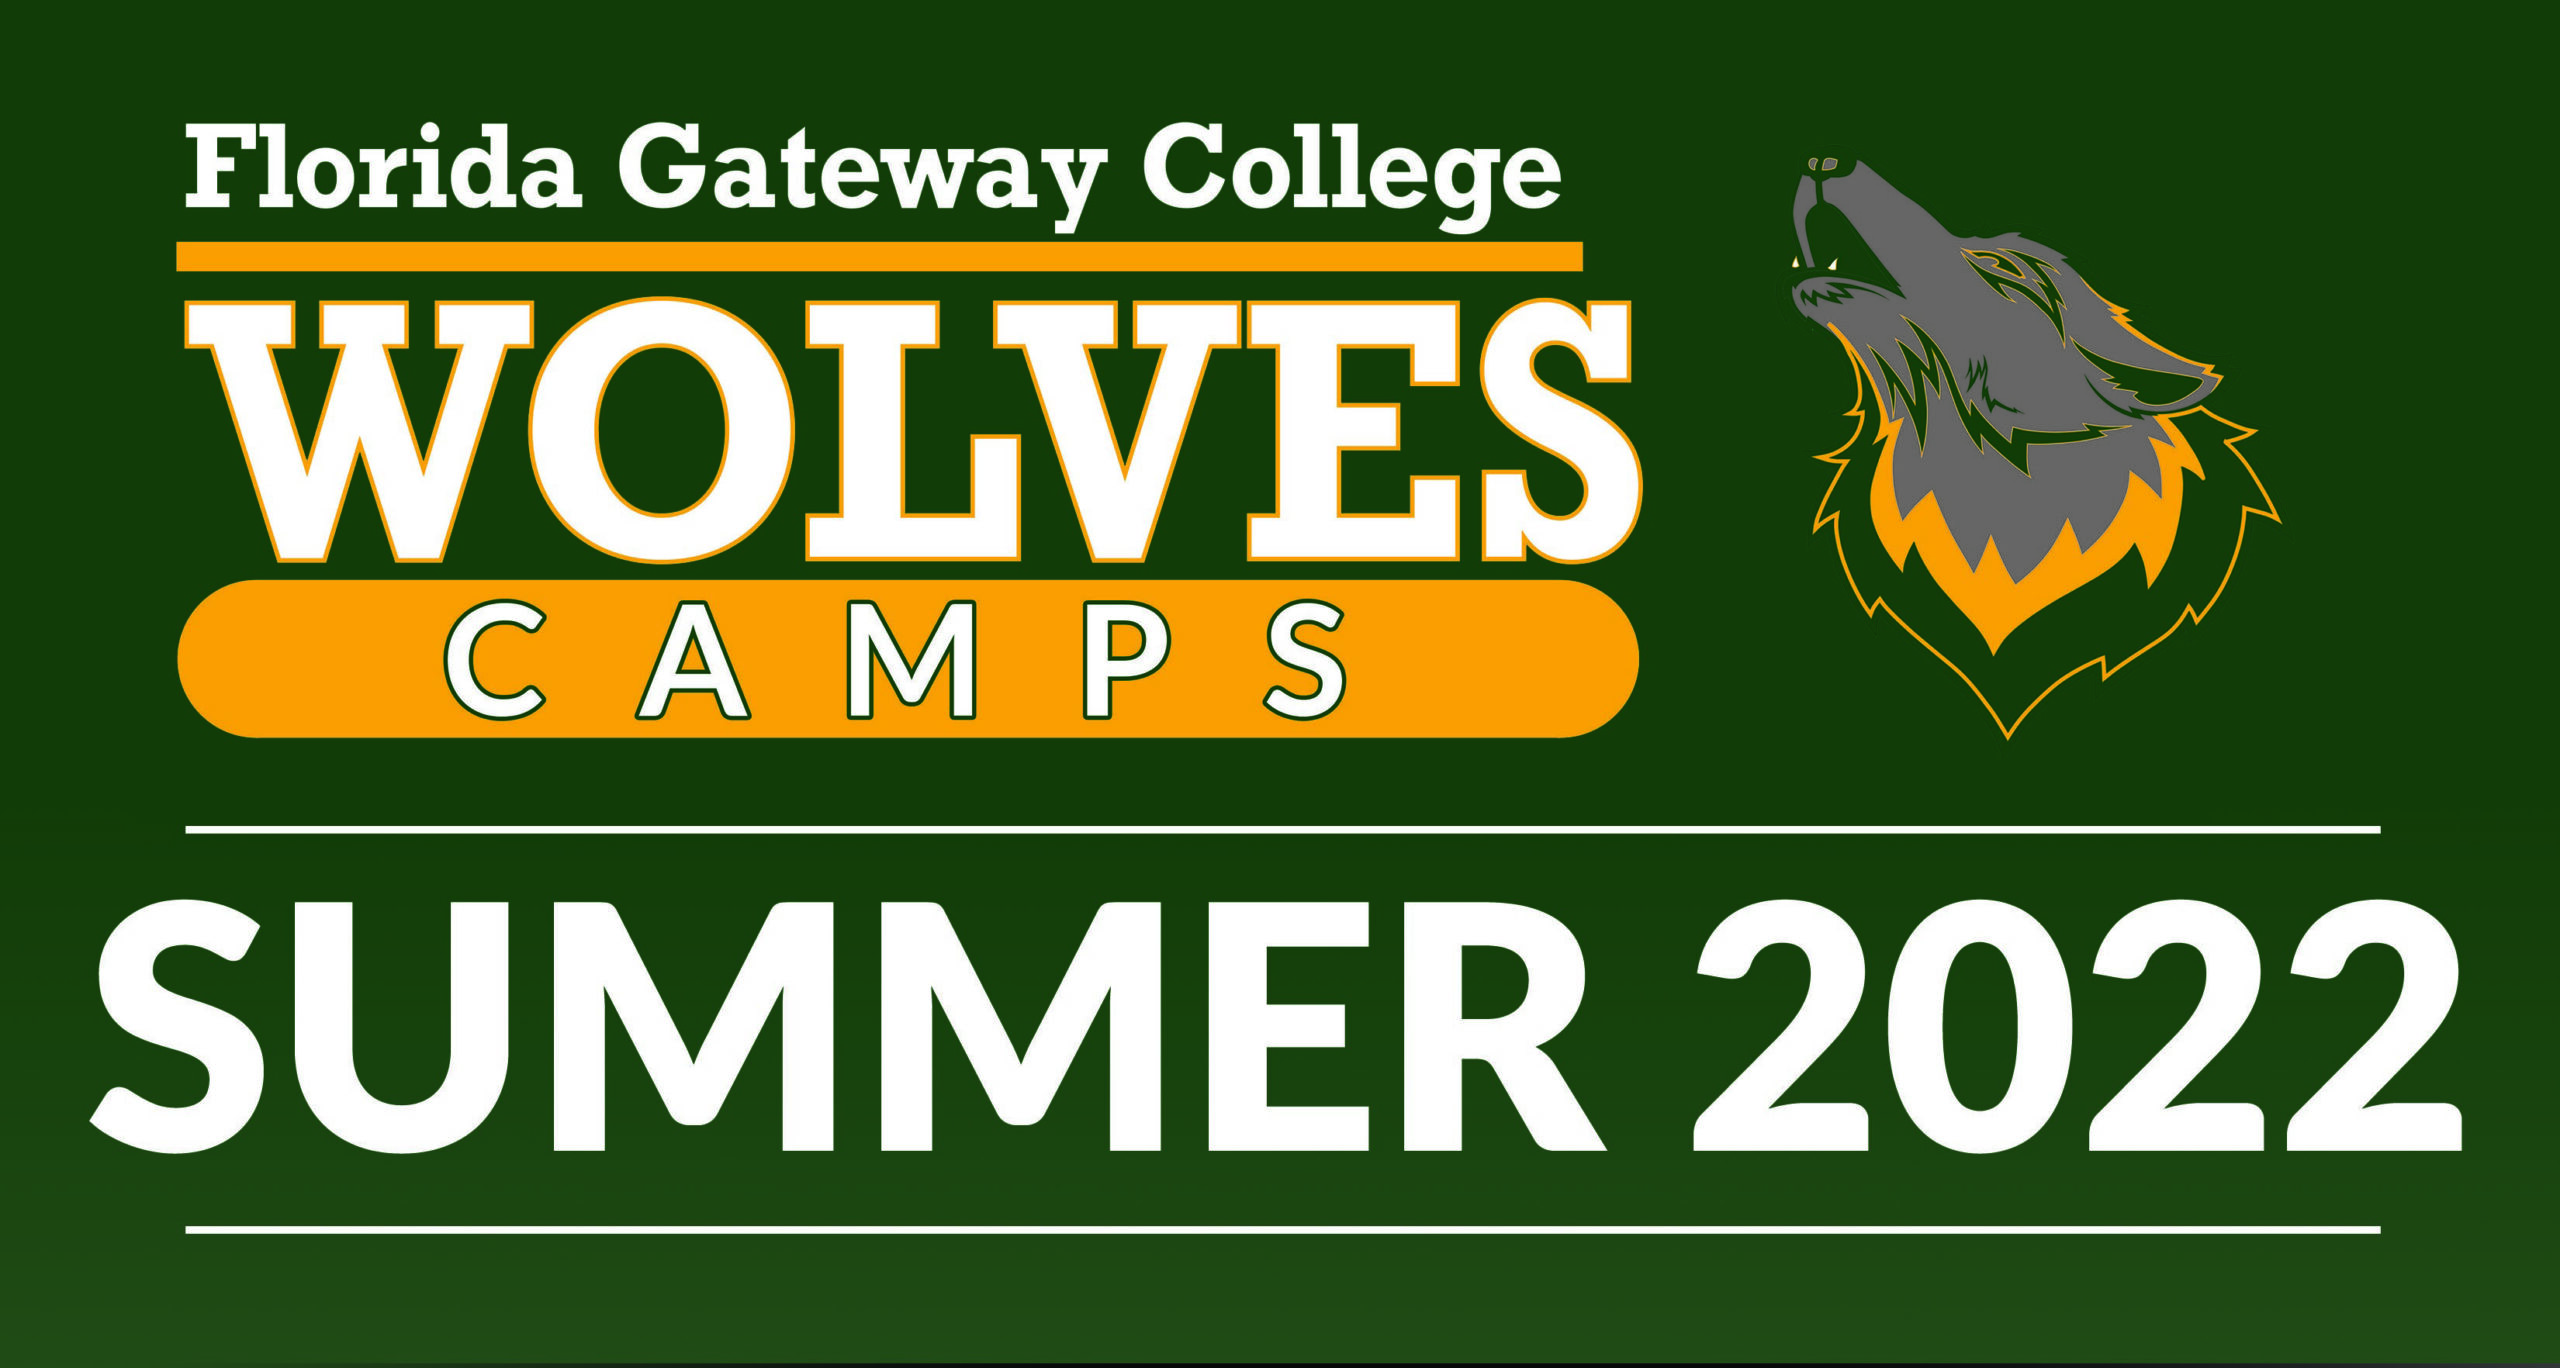 FGC Announces 2022 Youth Summer Camps - Florida Gateway College